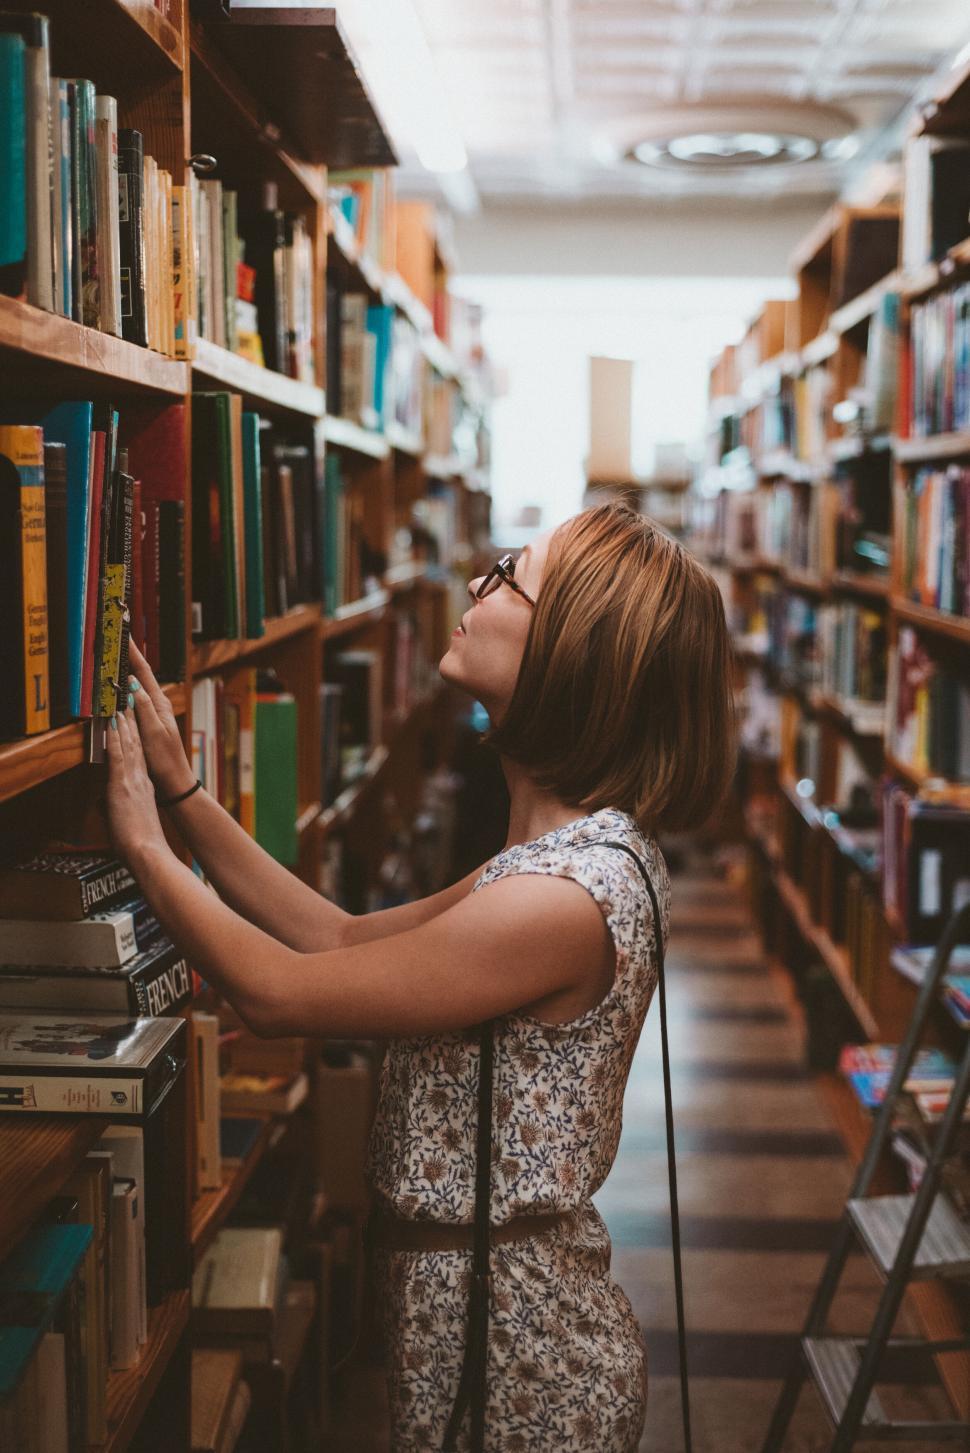 Free Image of Woman browsing books in library aisle 